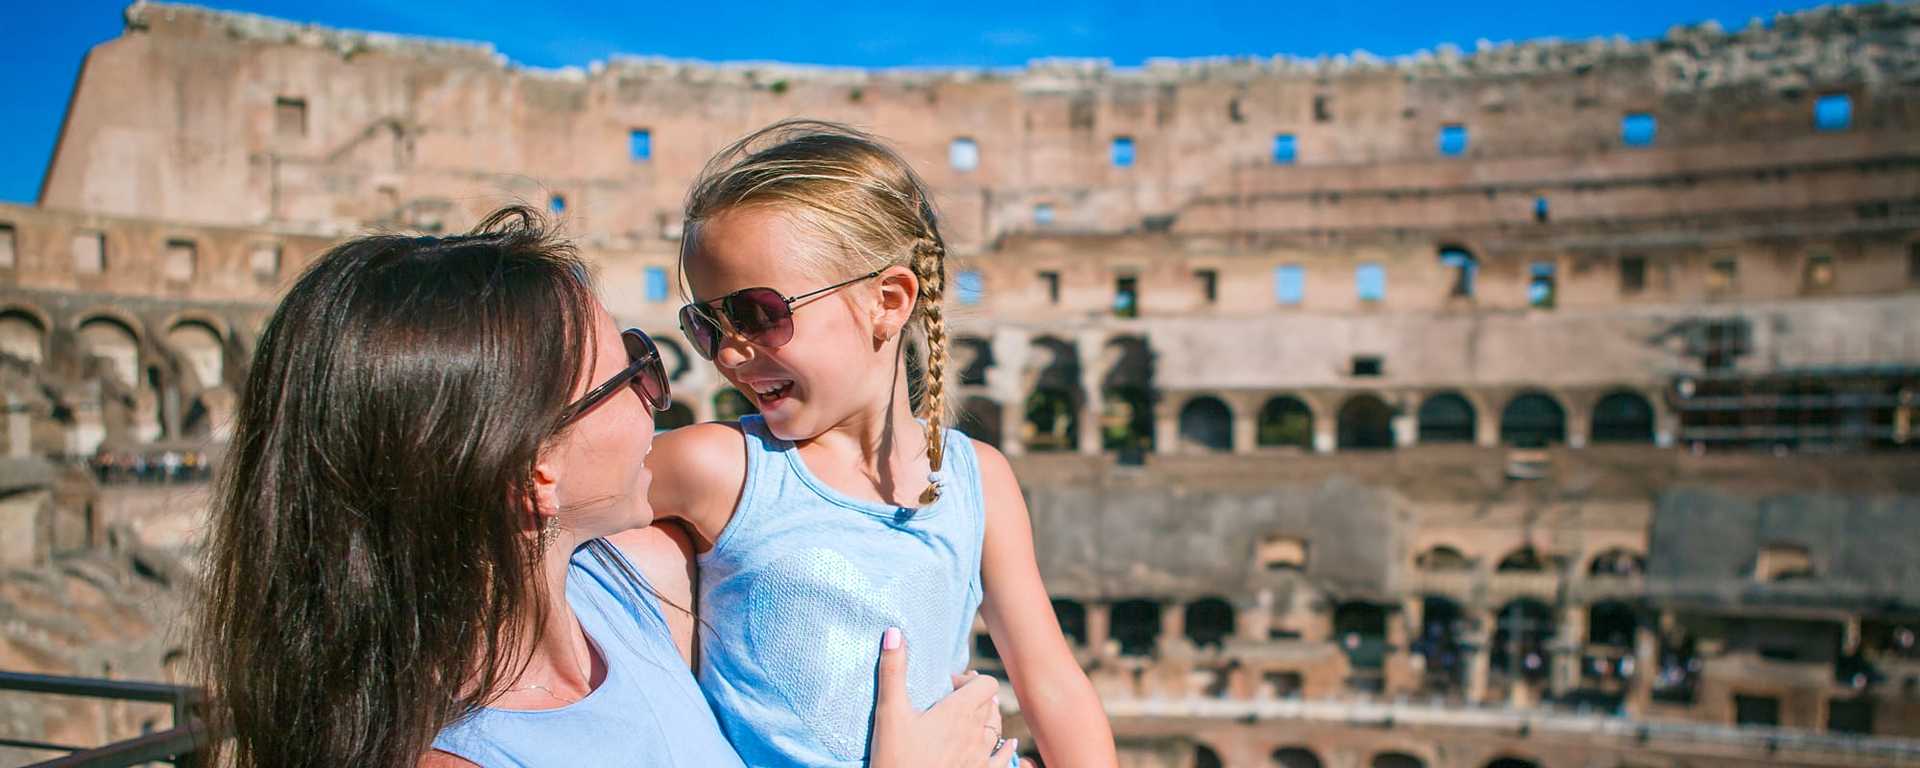 Mother and daughter at the Colosseum in Rome, Italy